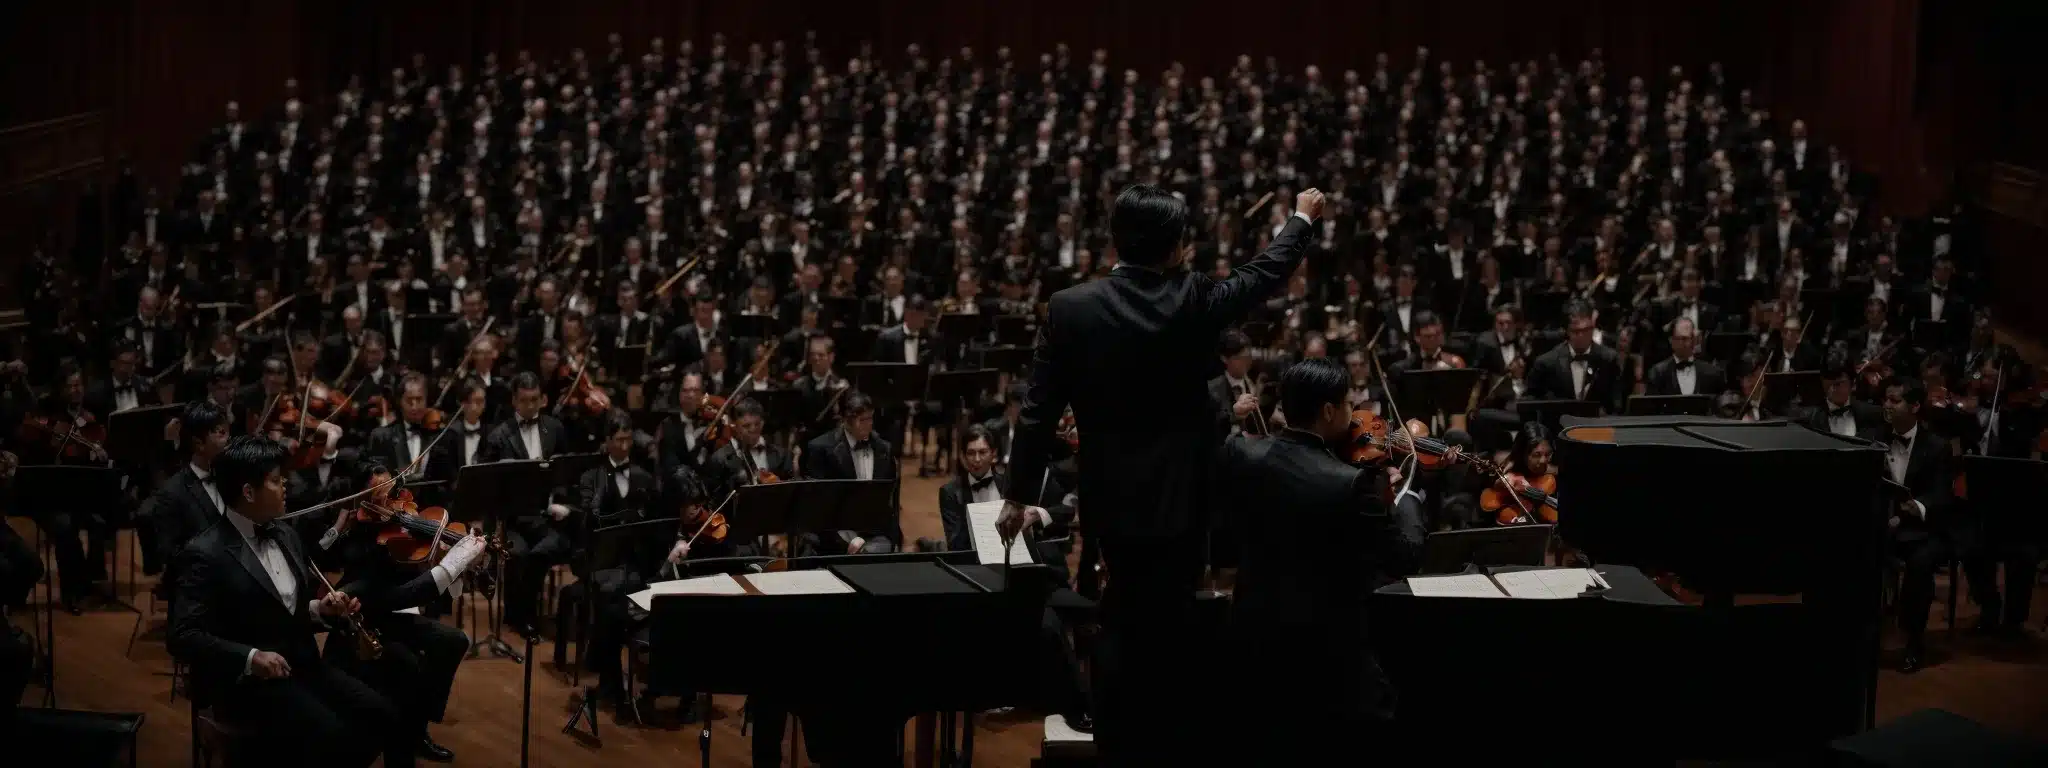 A Conductor Stands Before An Orchestra, Ready To Blend The Symphony Of Instruments Into A Seamless Performance.